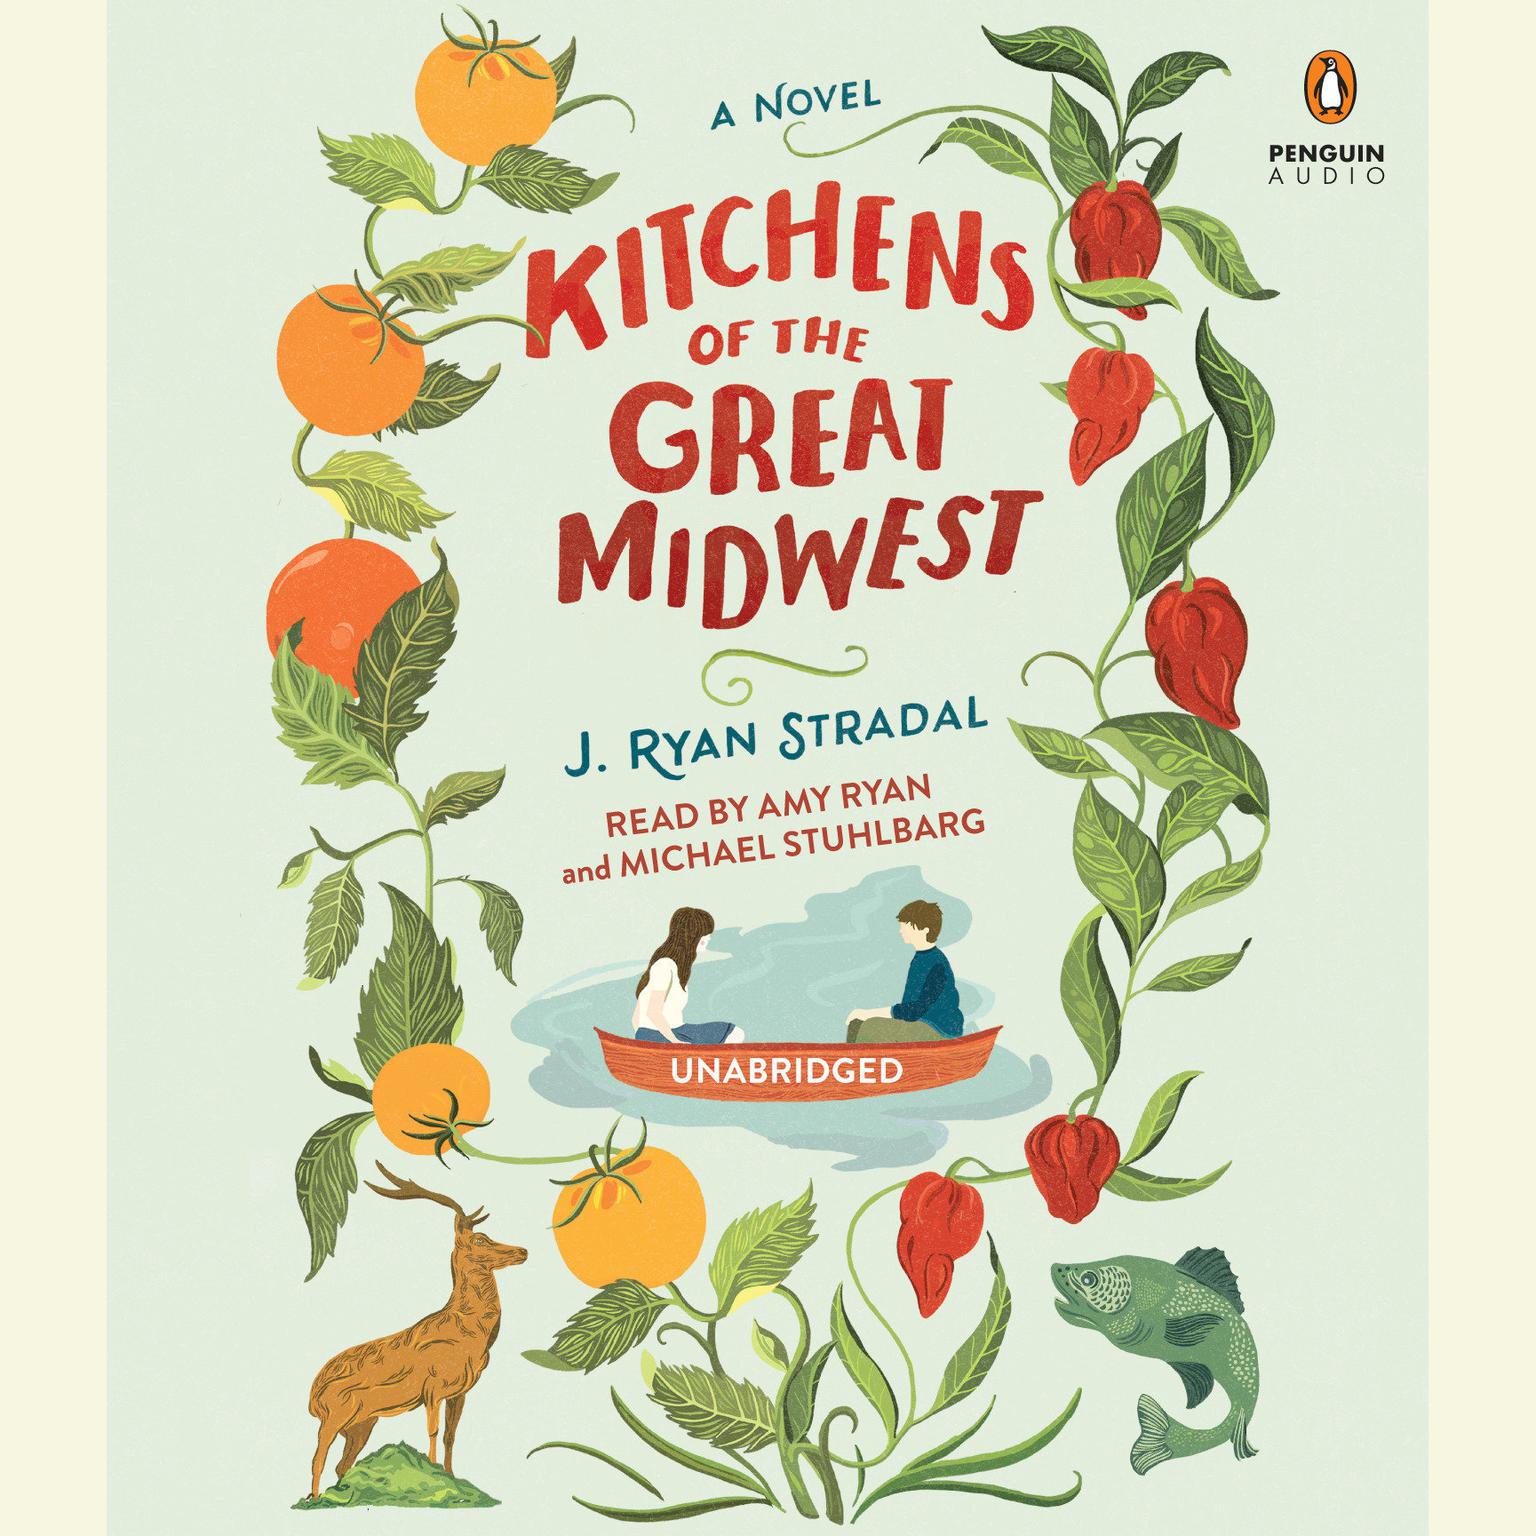 Kitchens of the Great Midwest: A Novel Audiobook, by J. Ryan Stradal